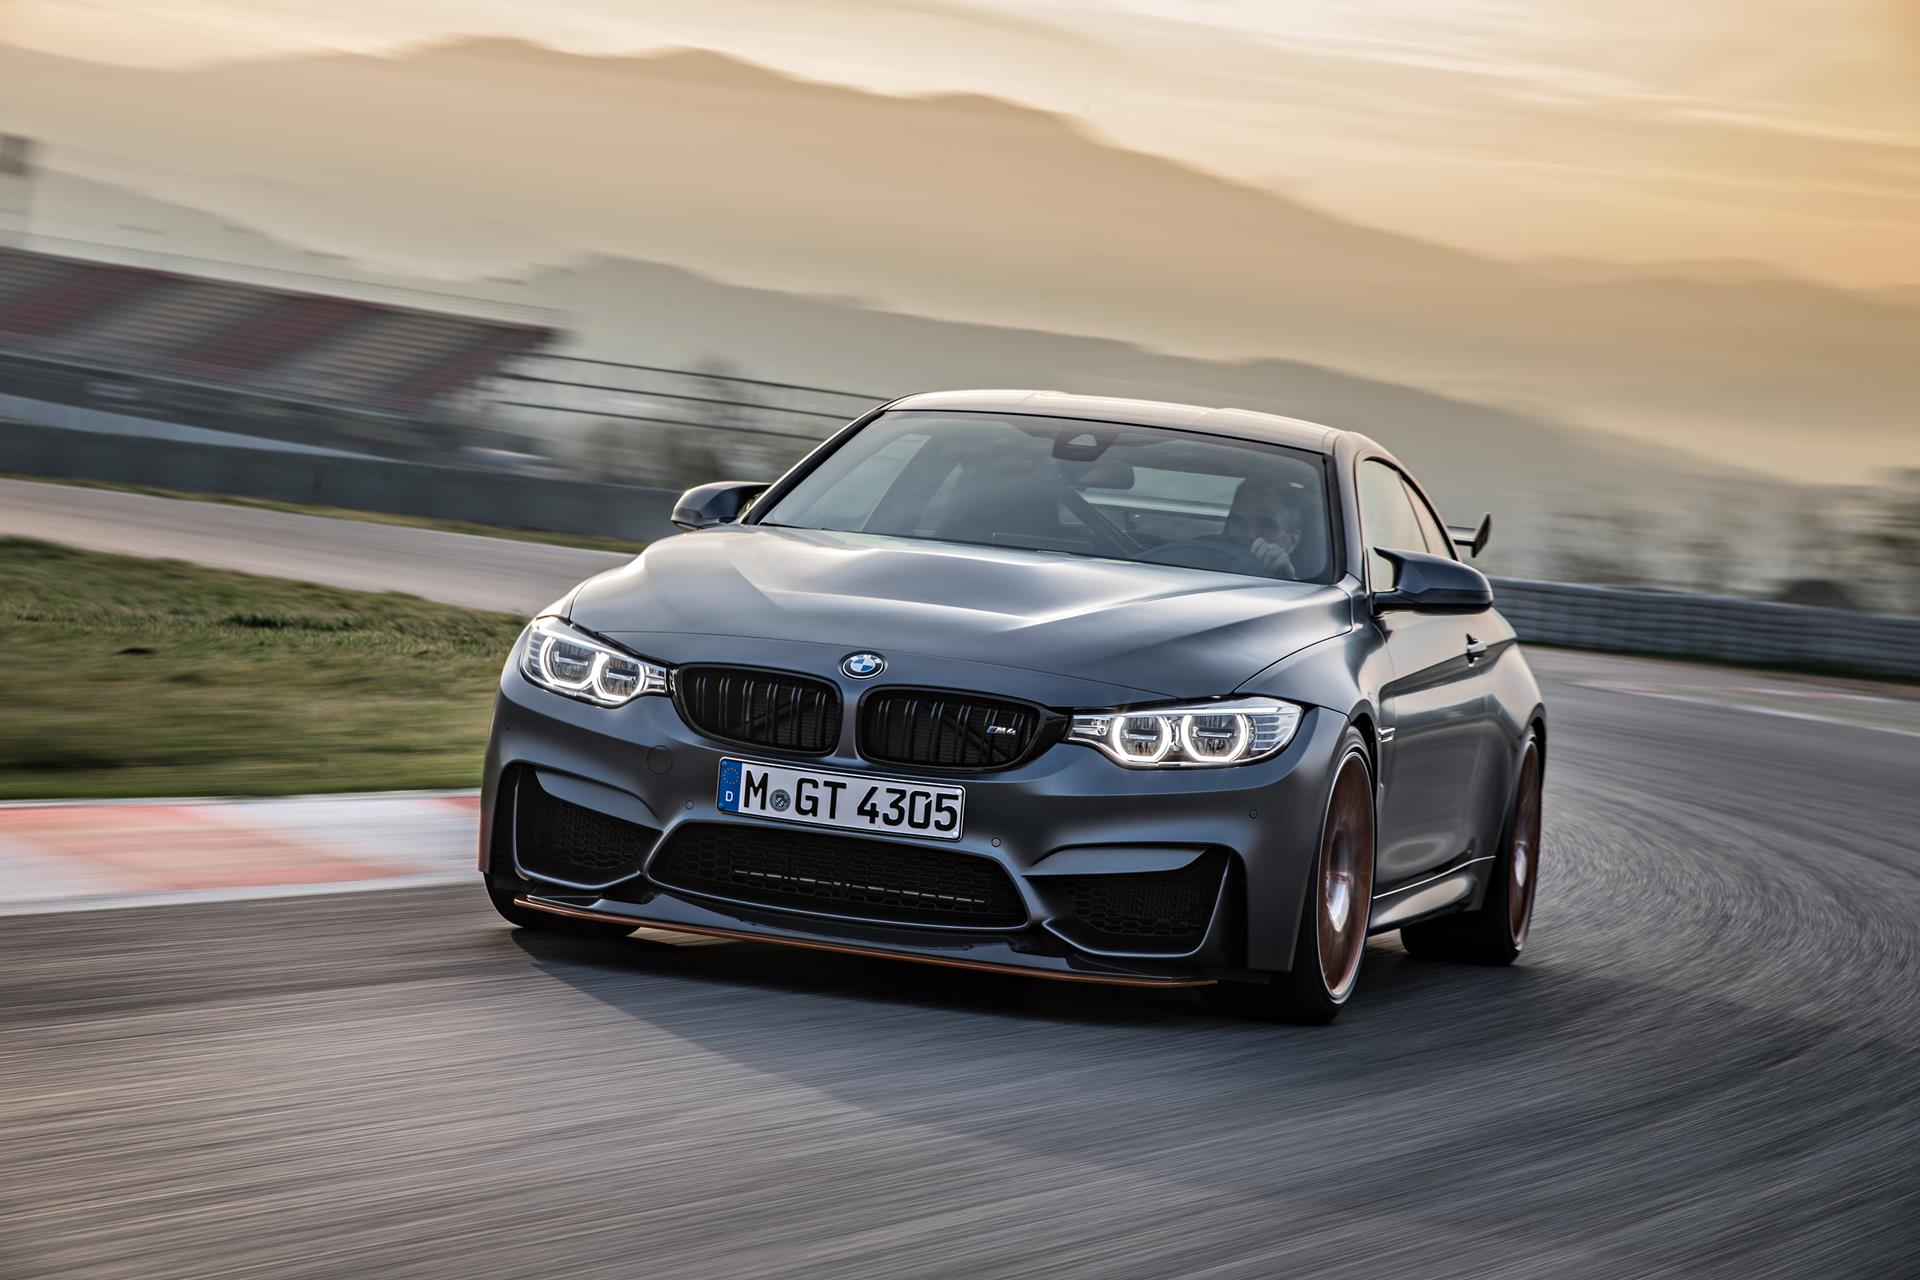 2016 Bmw M4 Gts Pictures And Wallpaper - Bmw M4 Gran Coupe 2016 - HD Wallpaper 